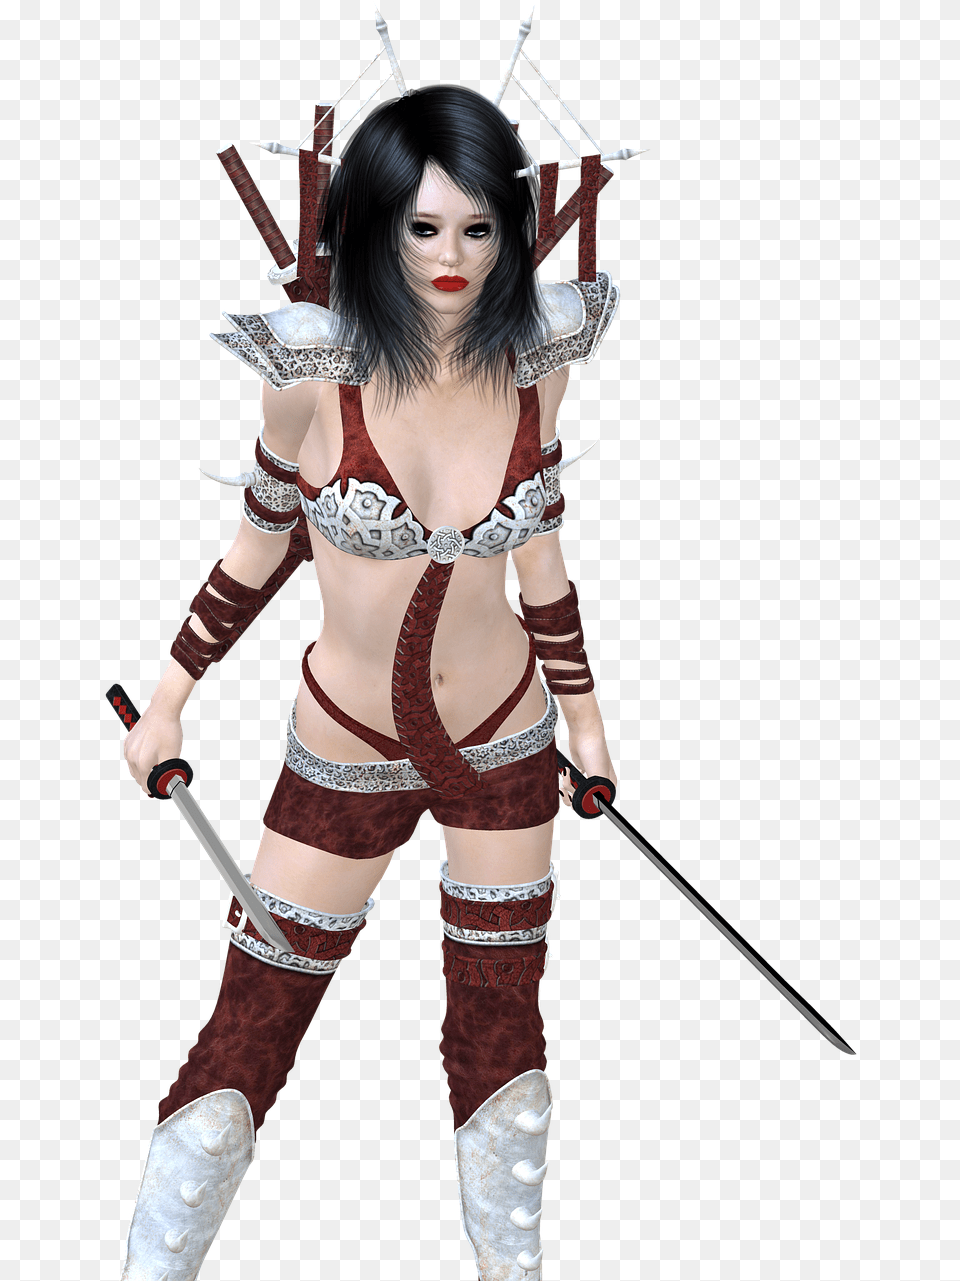 Woman Warrior, Weapon, Clothing, Sword, Costume Png